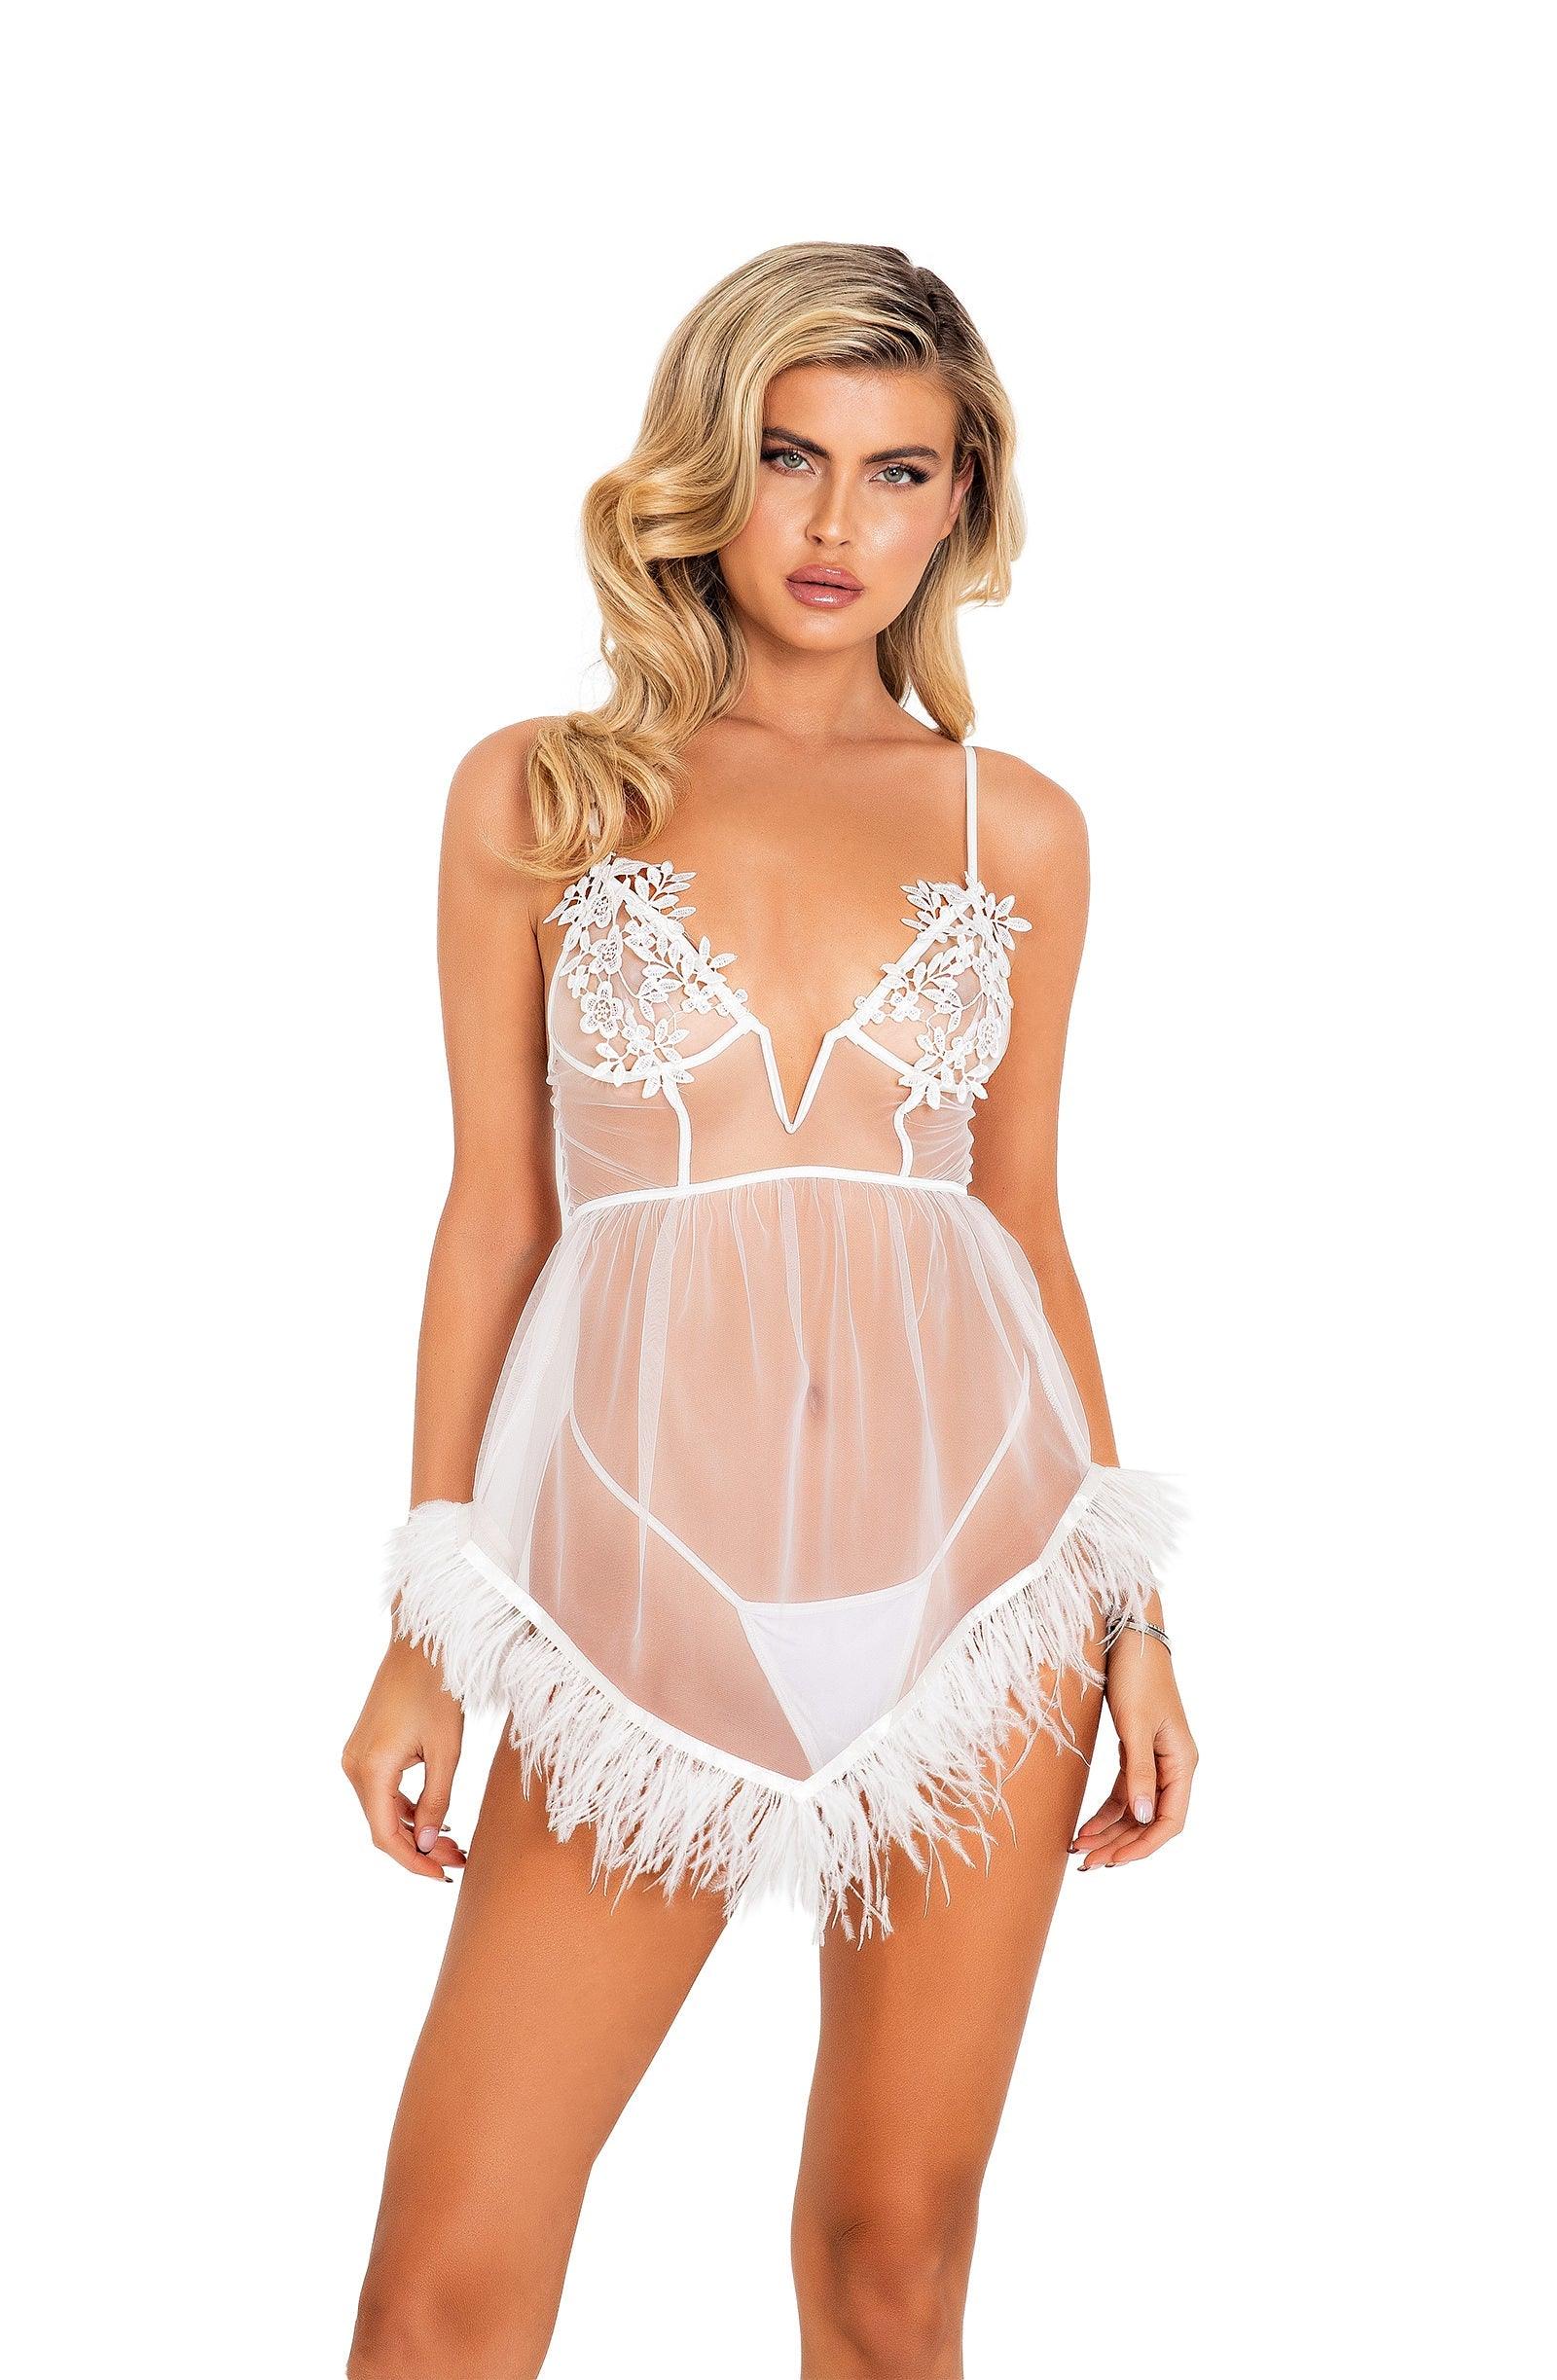 Roma Costume 2pc Bridal Corset Chemise with Ostrich Feather Trim & Panty - Flyclothing LLC